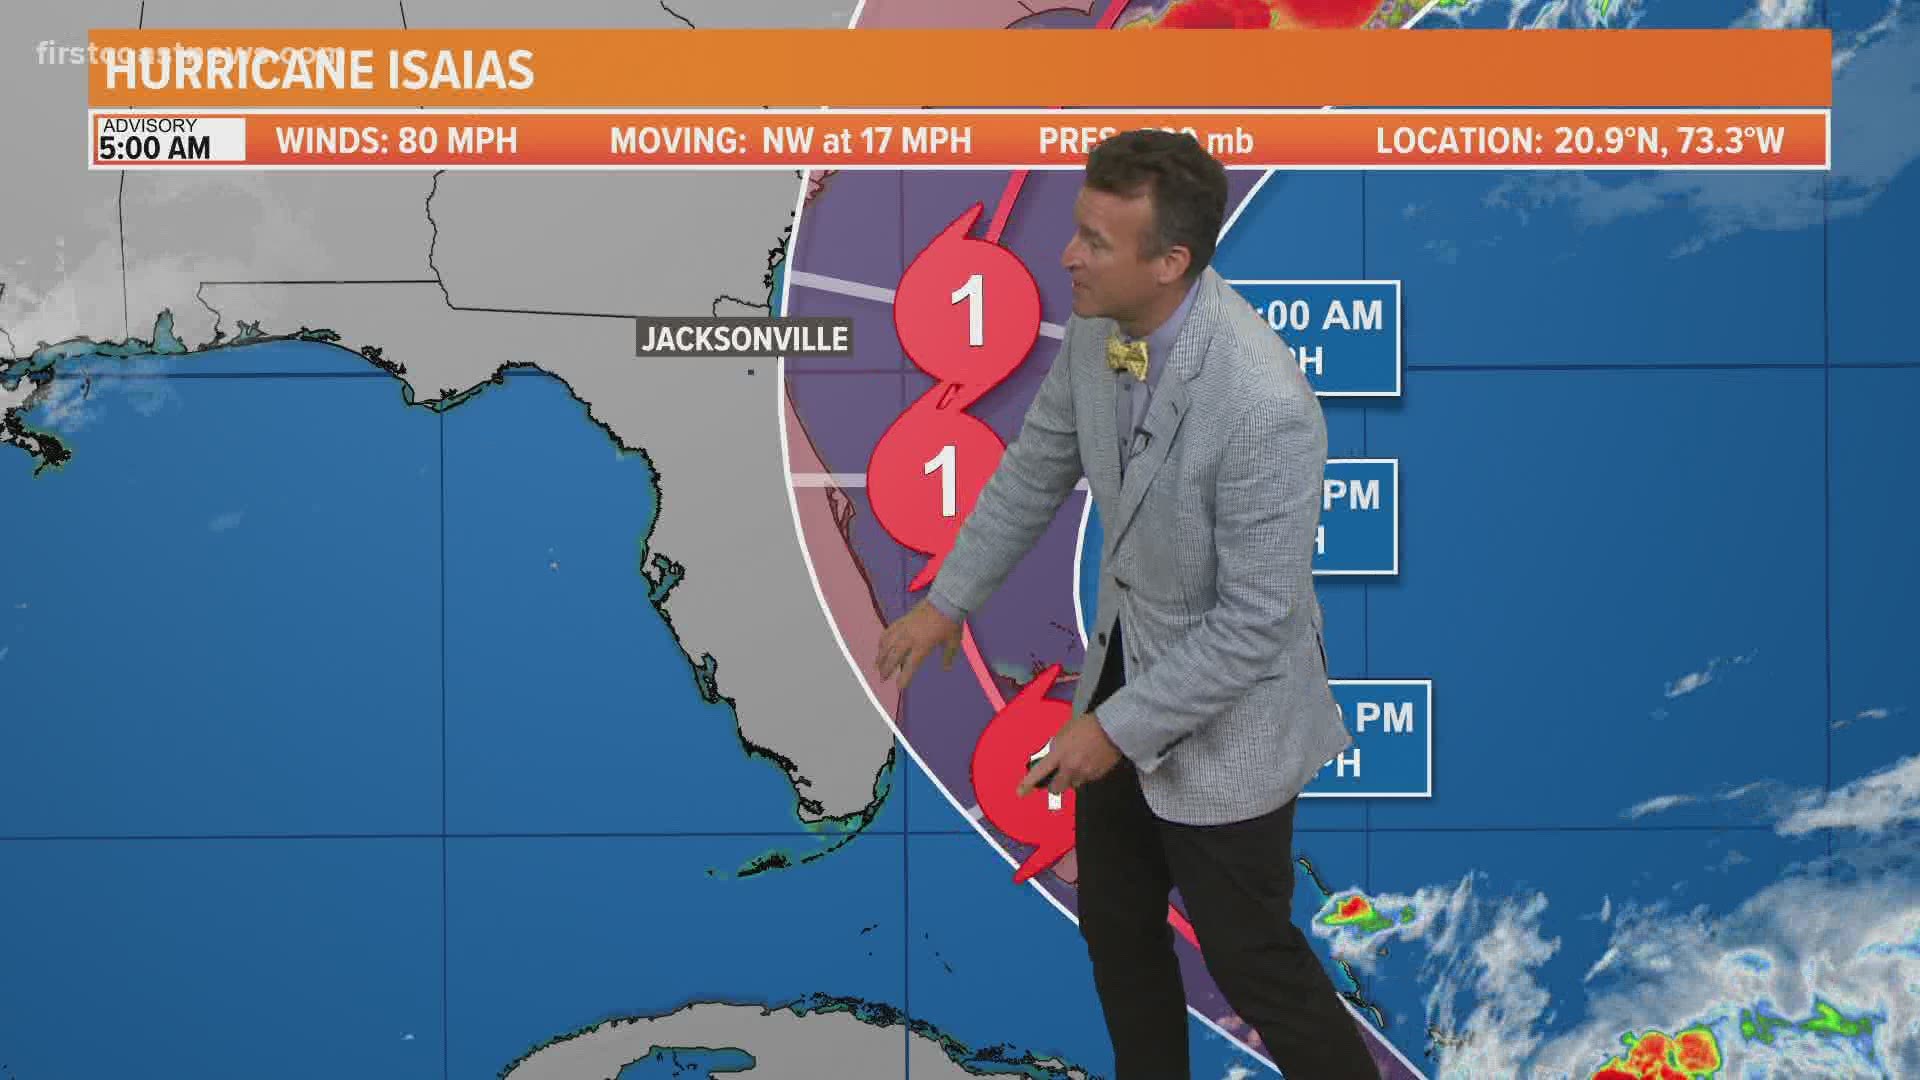 There will be some local impacts come Sunday as Isaías is expect to pass just offshore of the First Coast.